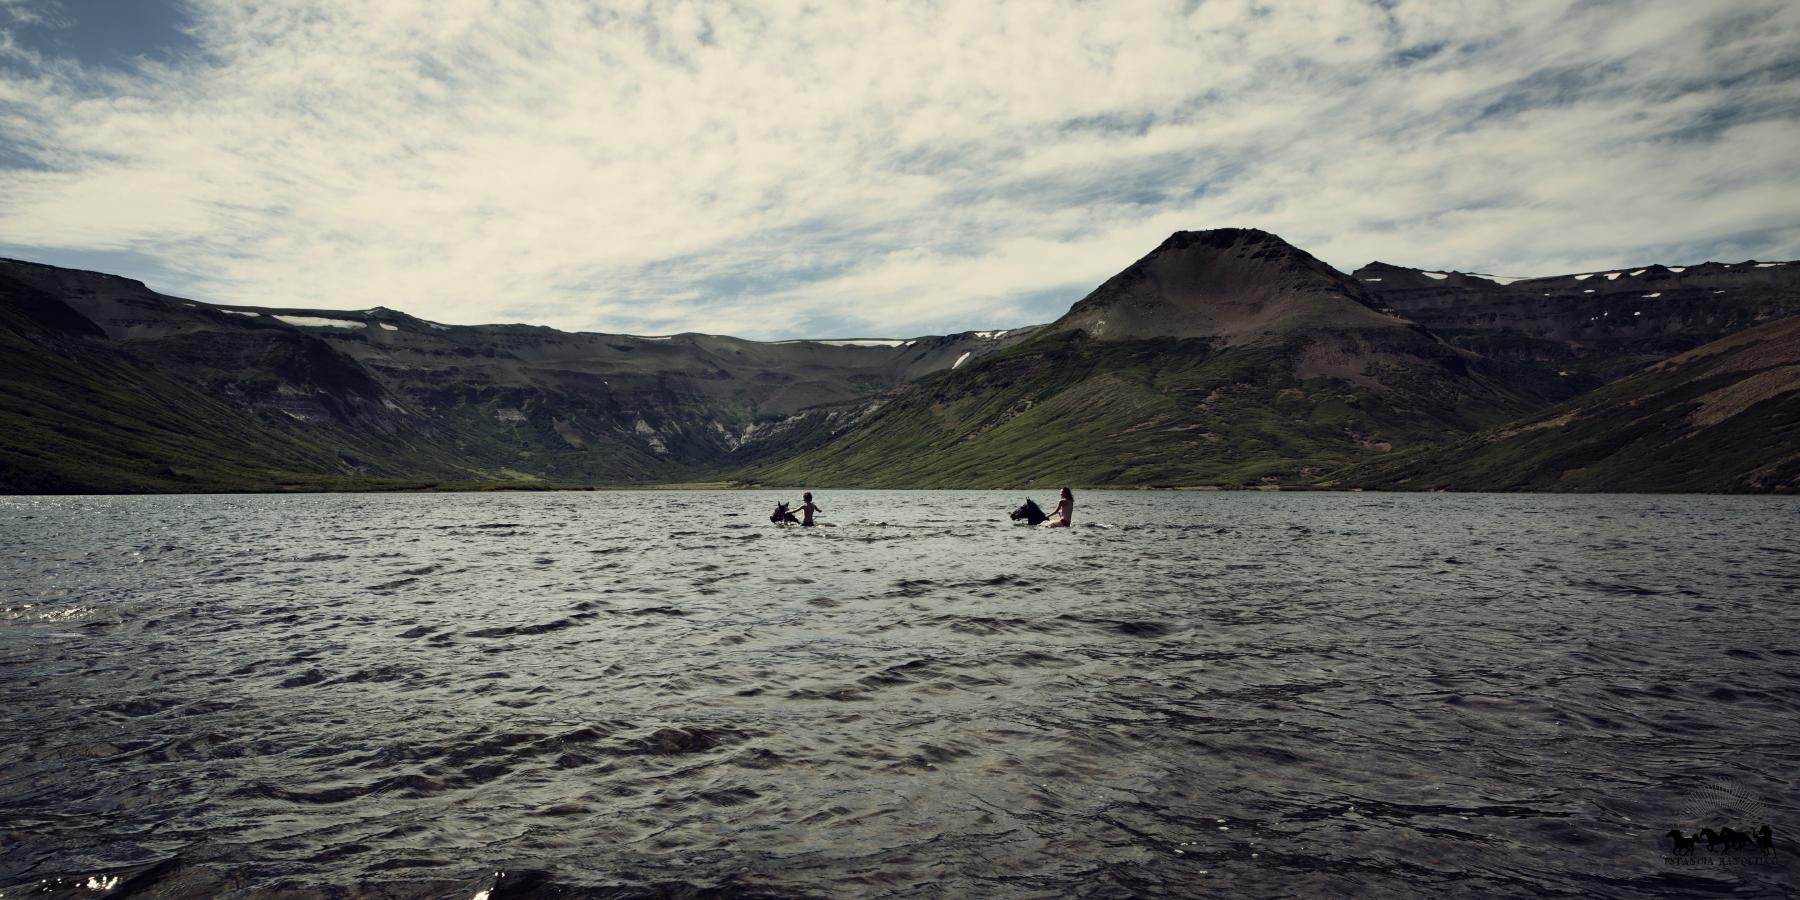 Swimming with horses in an alpine lake in Argentina